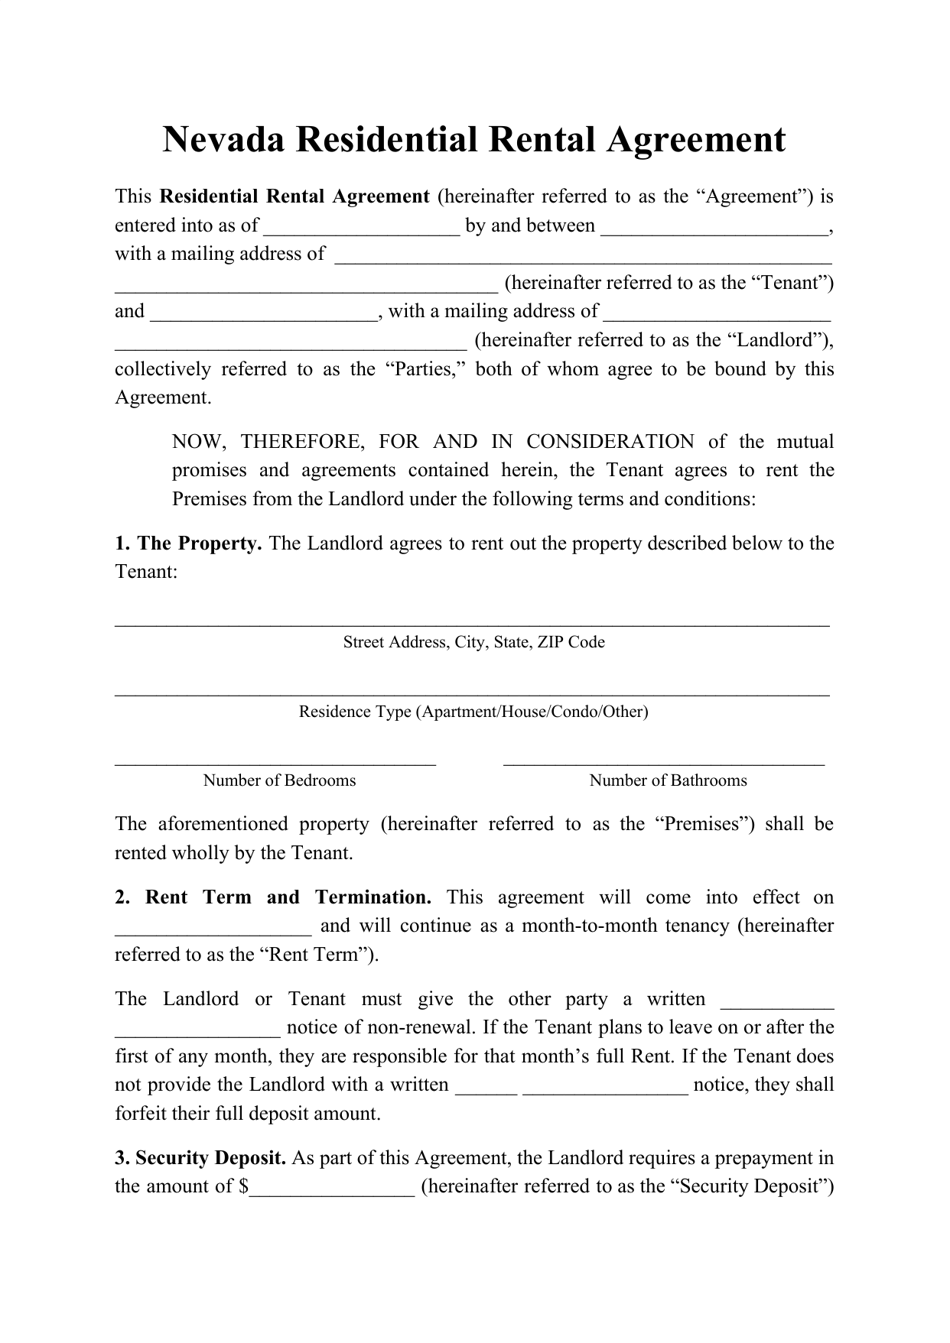 Nevada Residential Rental Agreement Template Download Printable PDF Templateroller